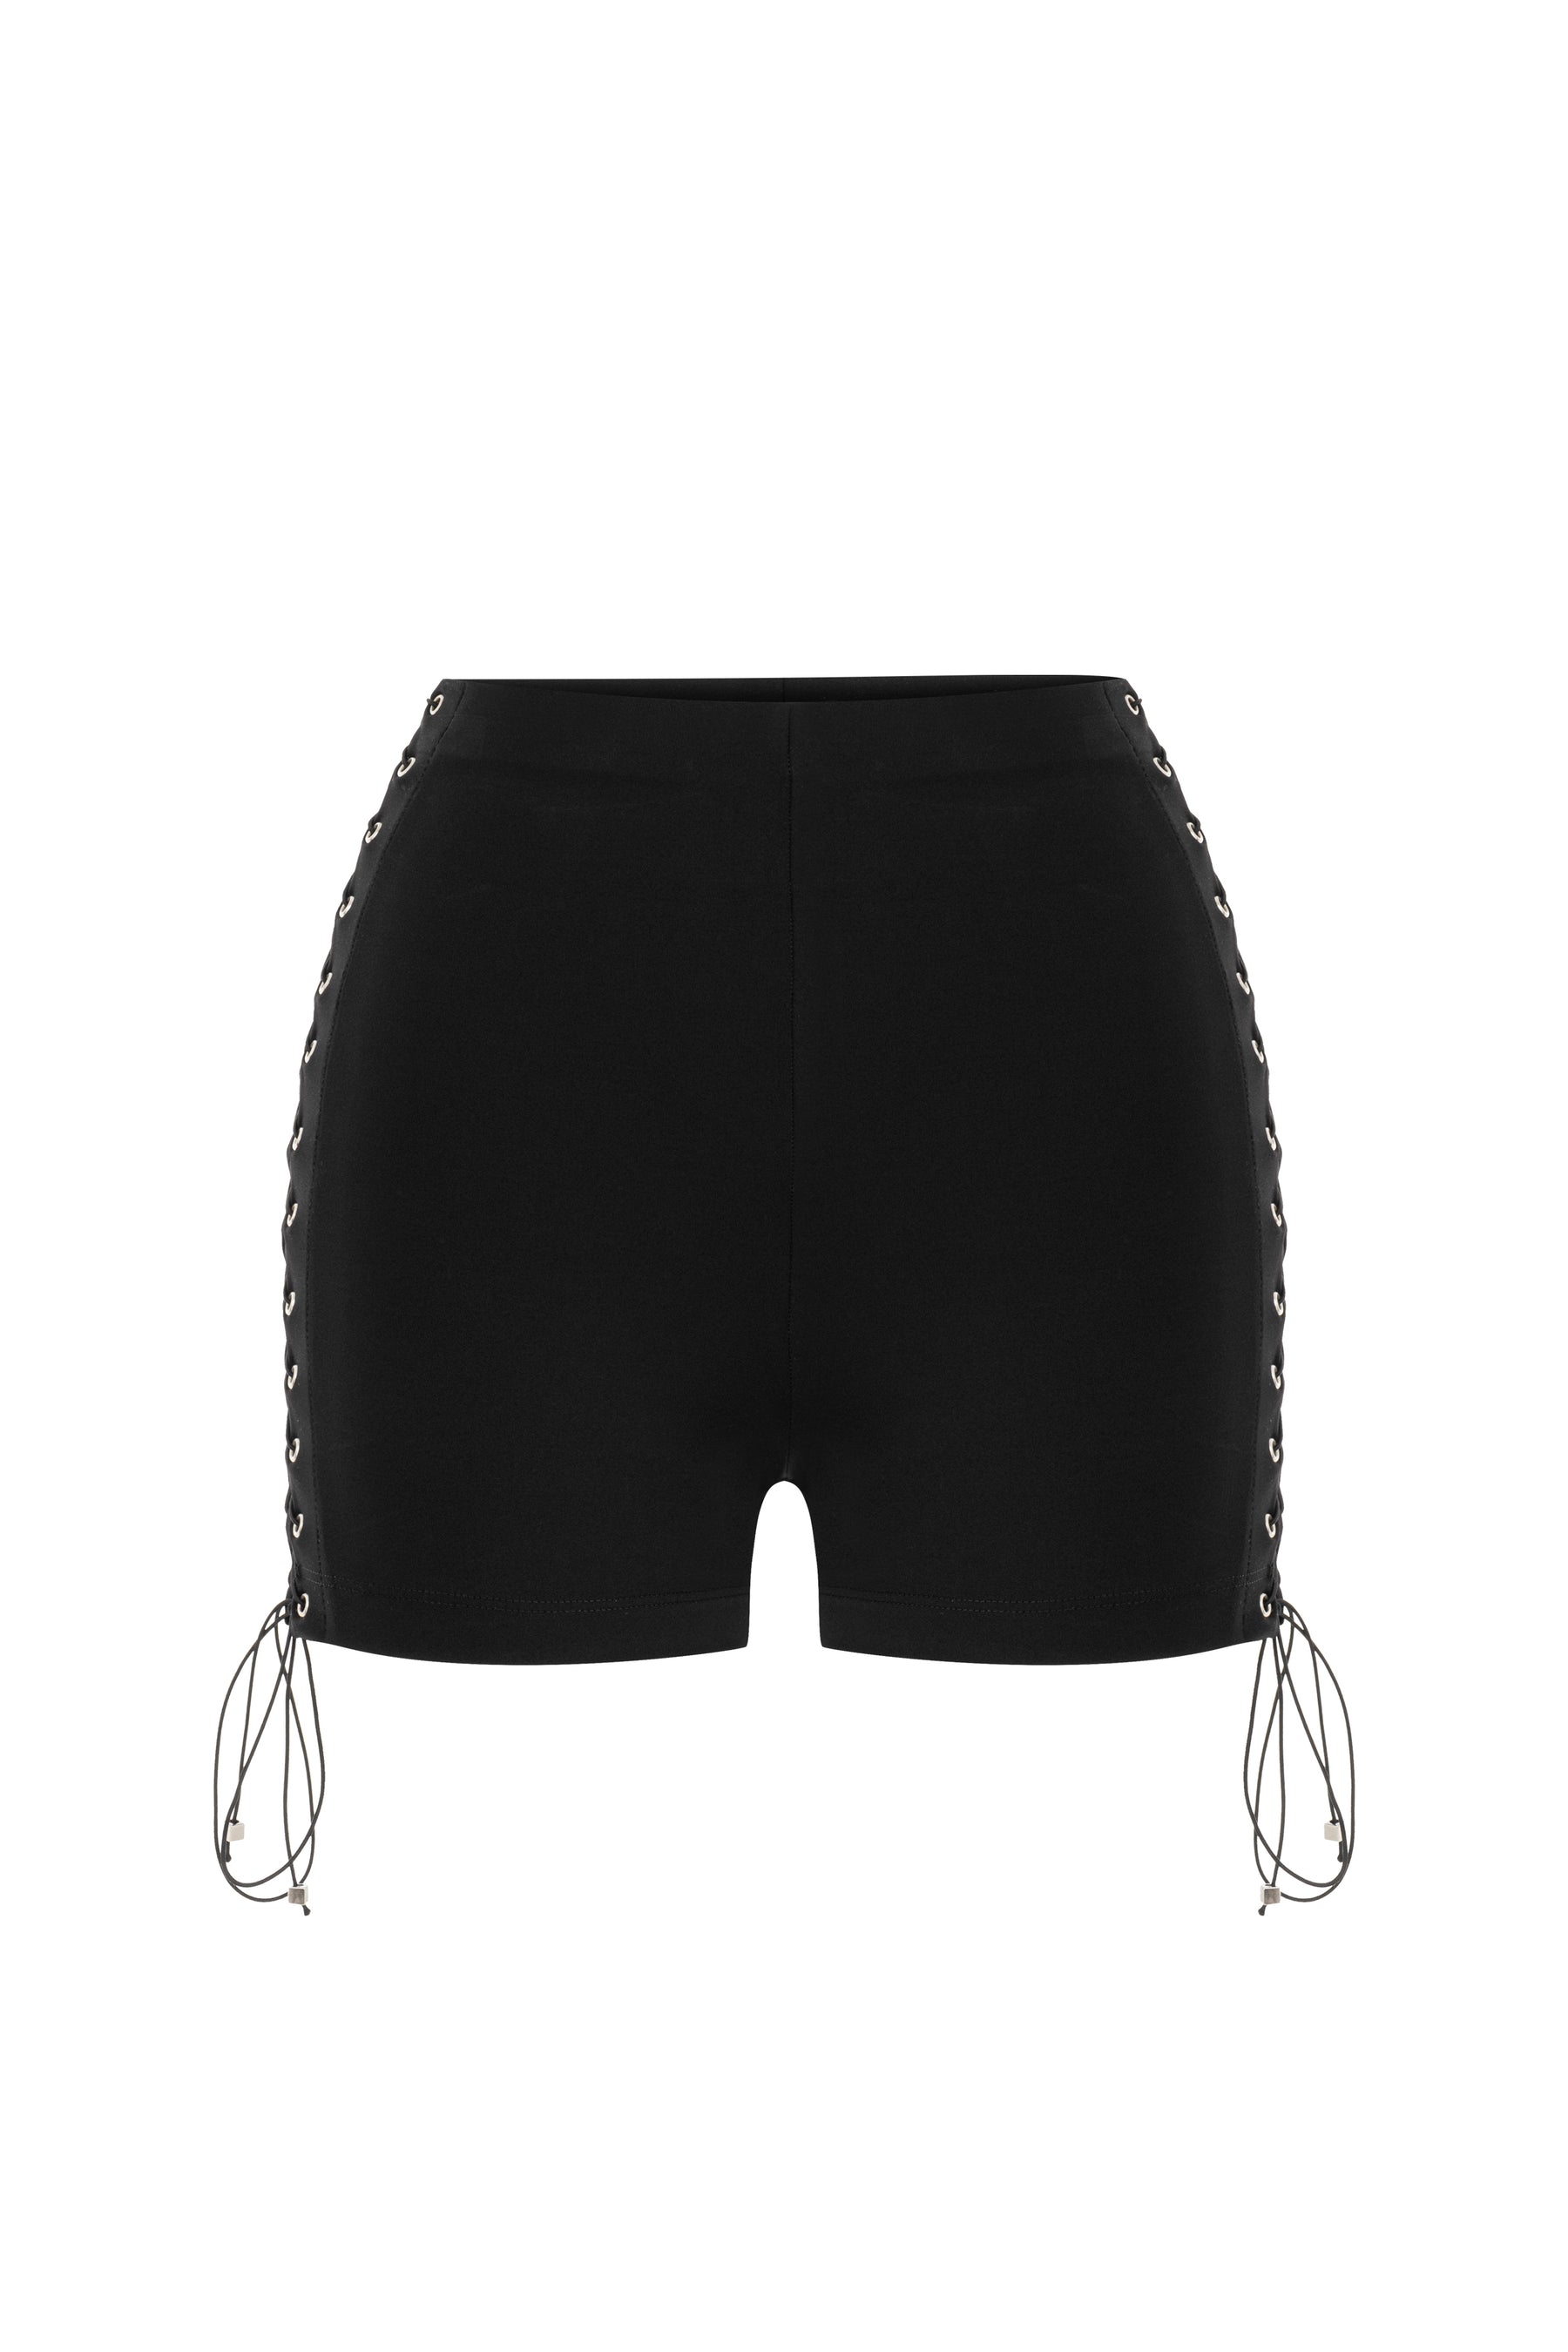 Obsession Shorts in Black